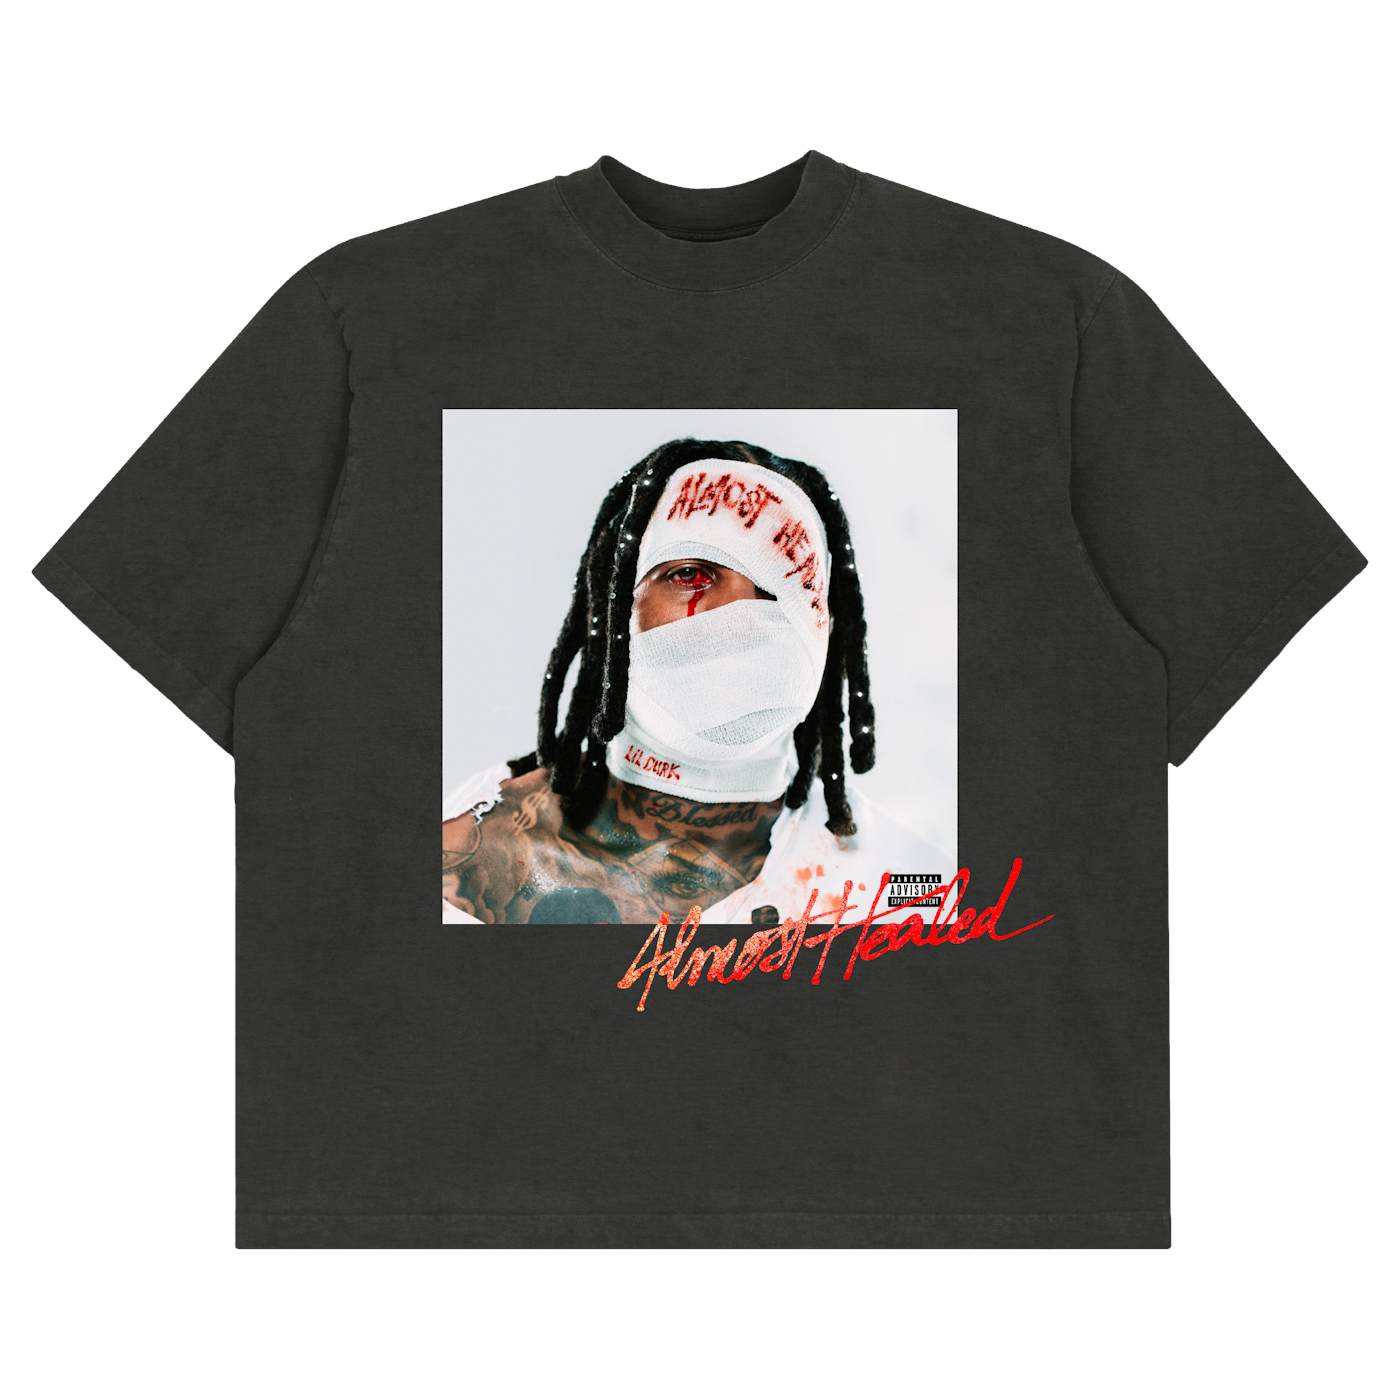 Lil Durk ALMOST HEALED ALBUM COVER T-SHIRT